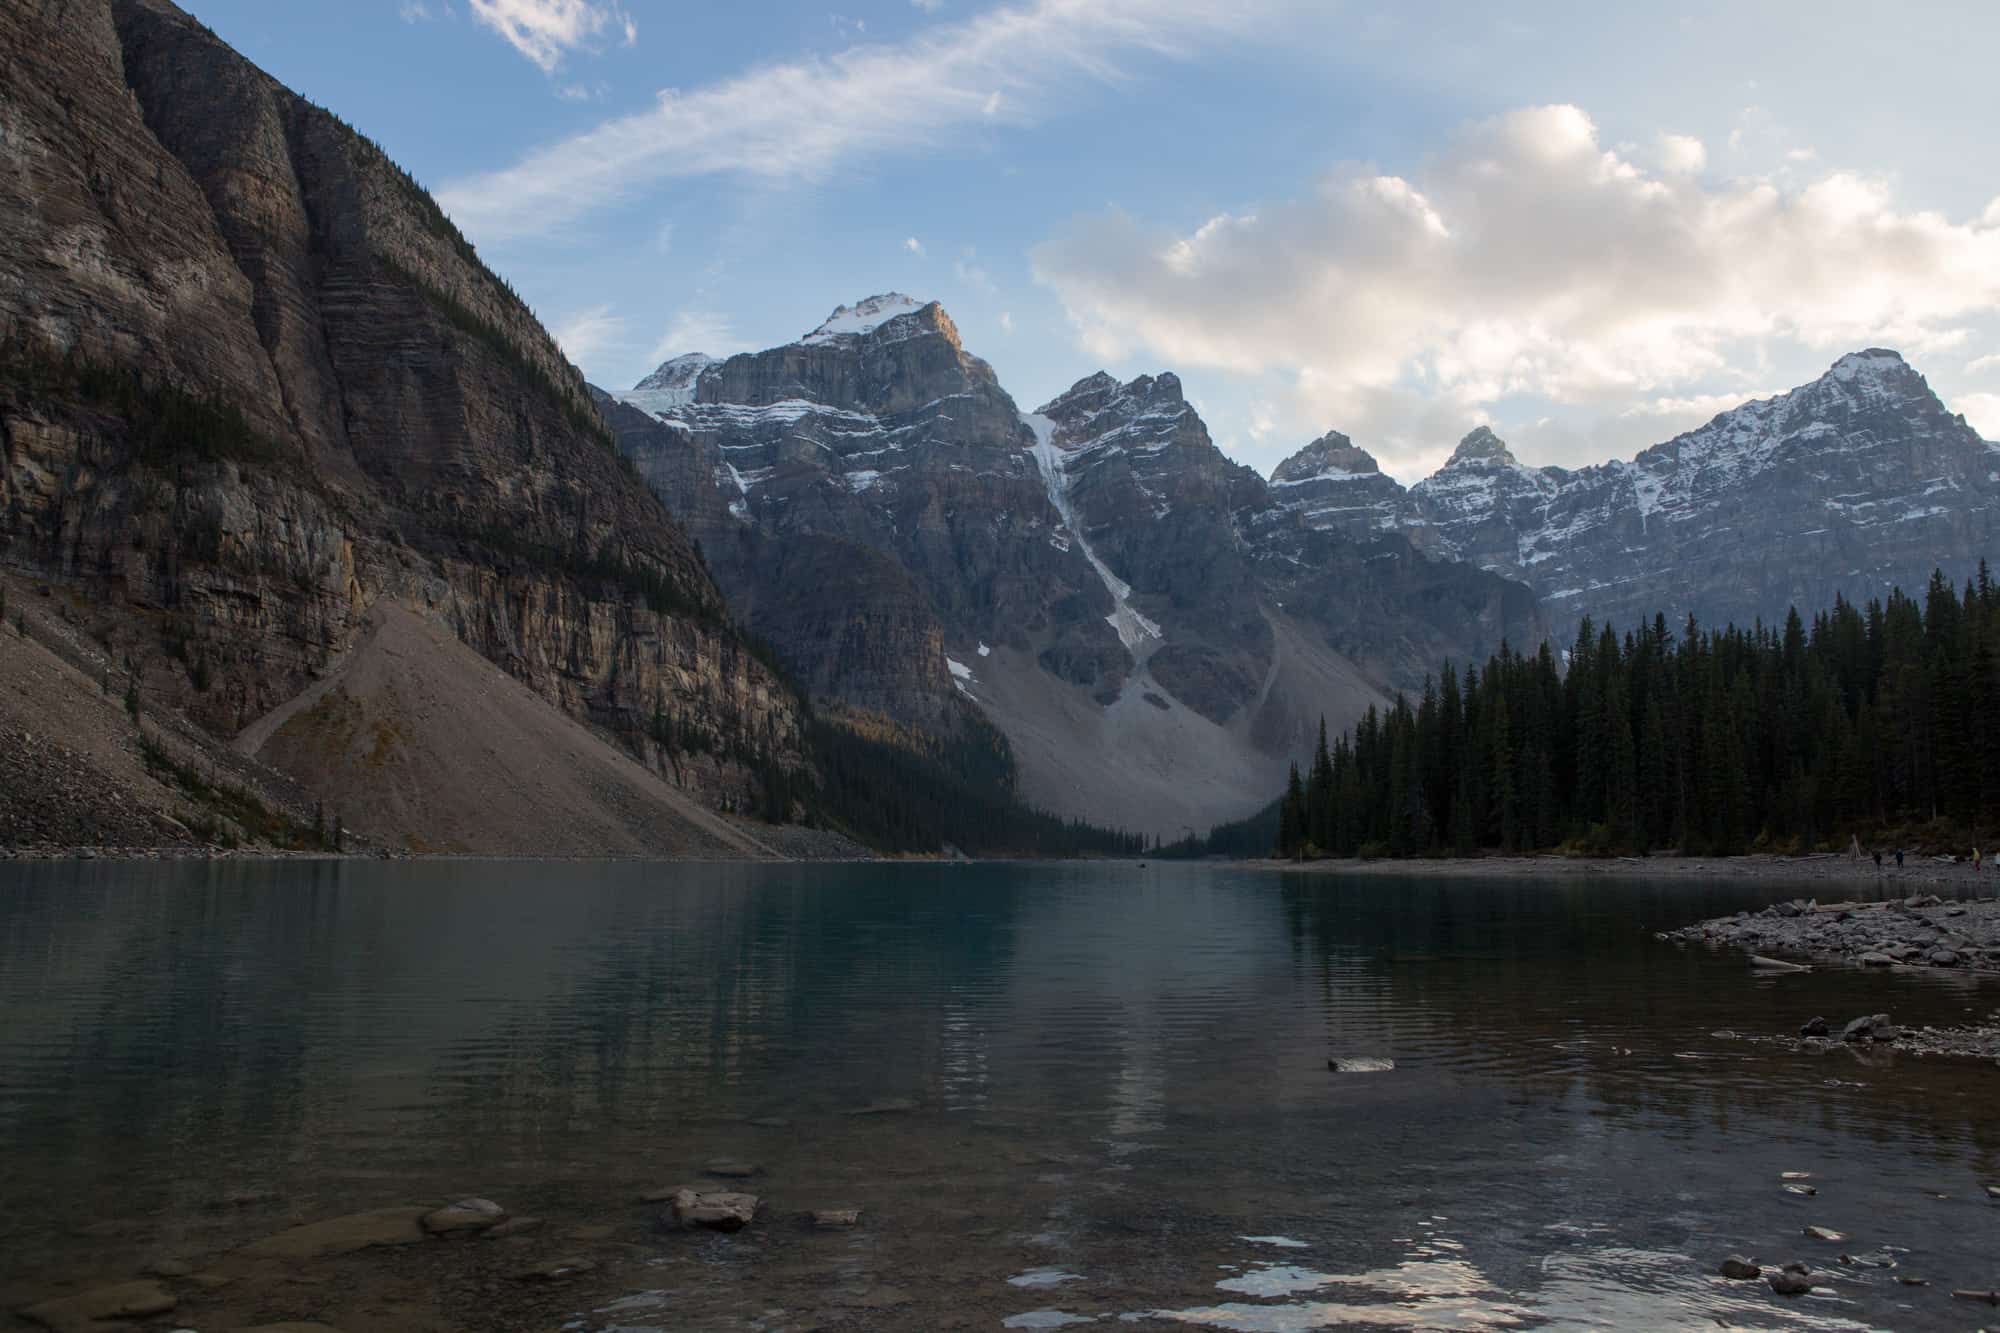 moraine lake, one of the glacial lakes can be seen with the mountains behind and is a popular photography spots in banff